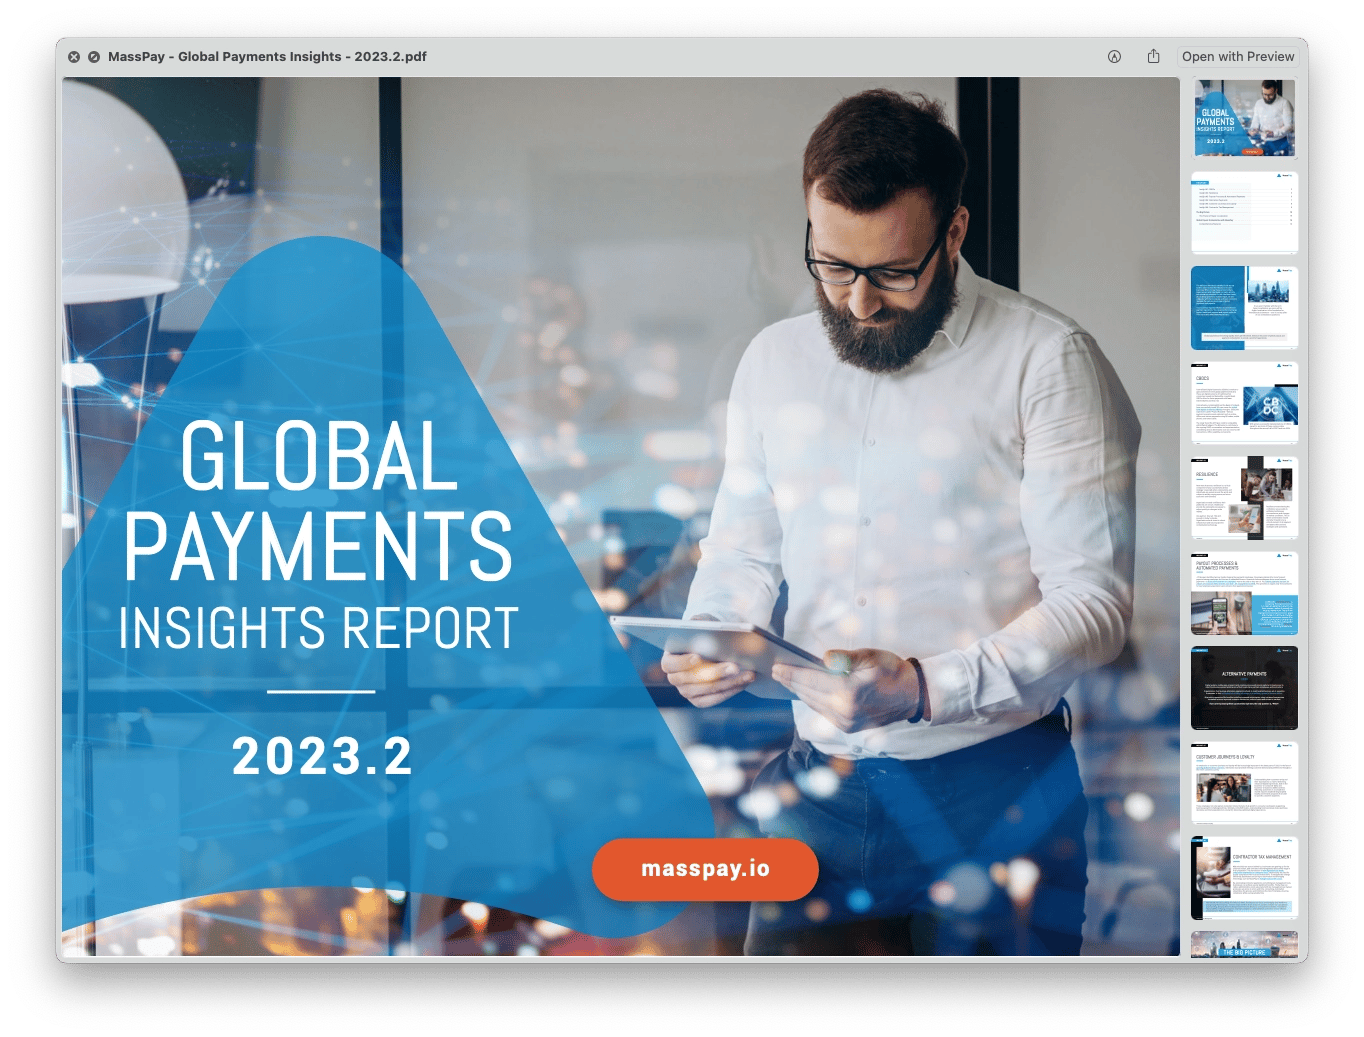 Download your free copy of MassPay's Global Payments Insights Report today.